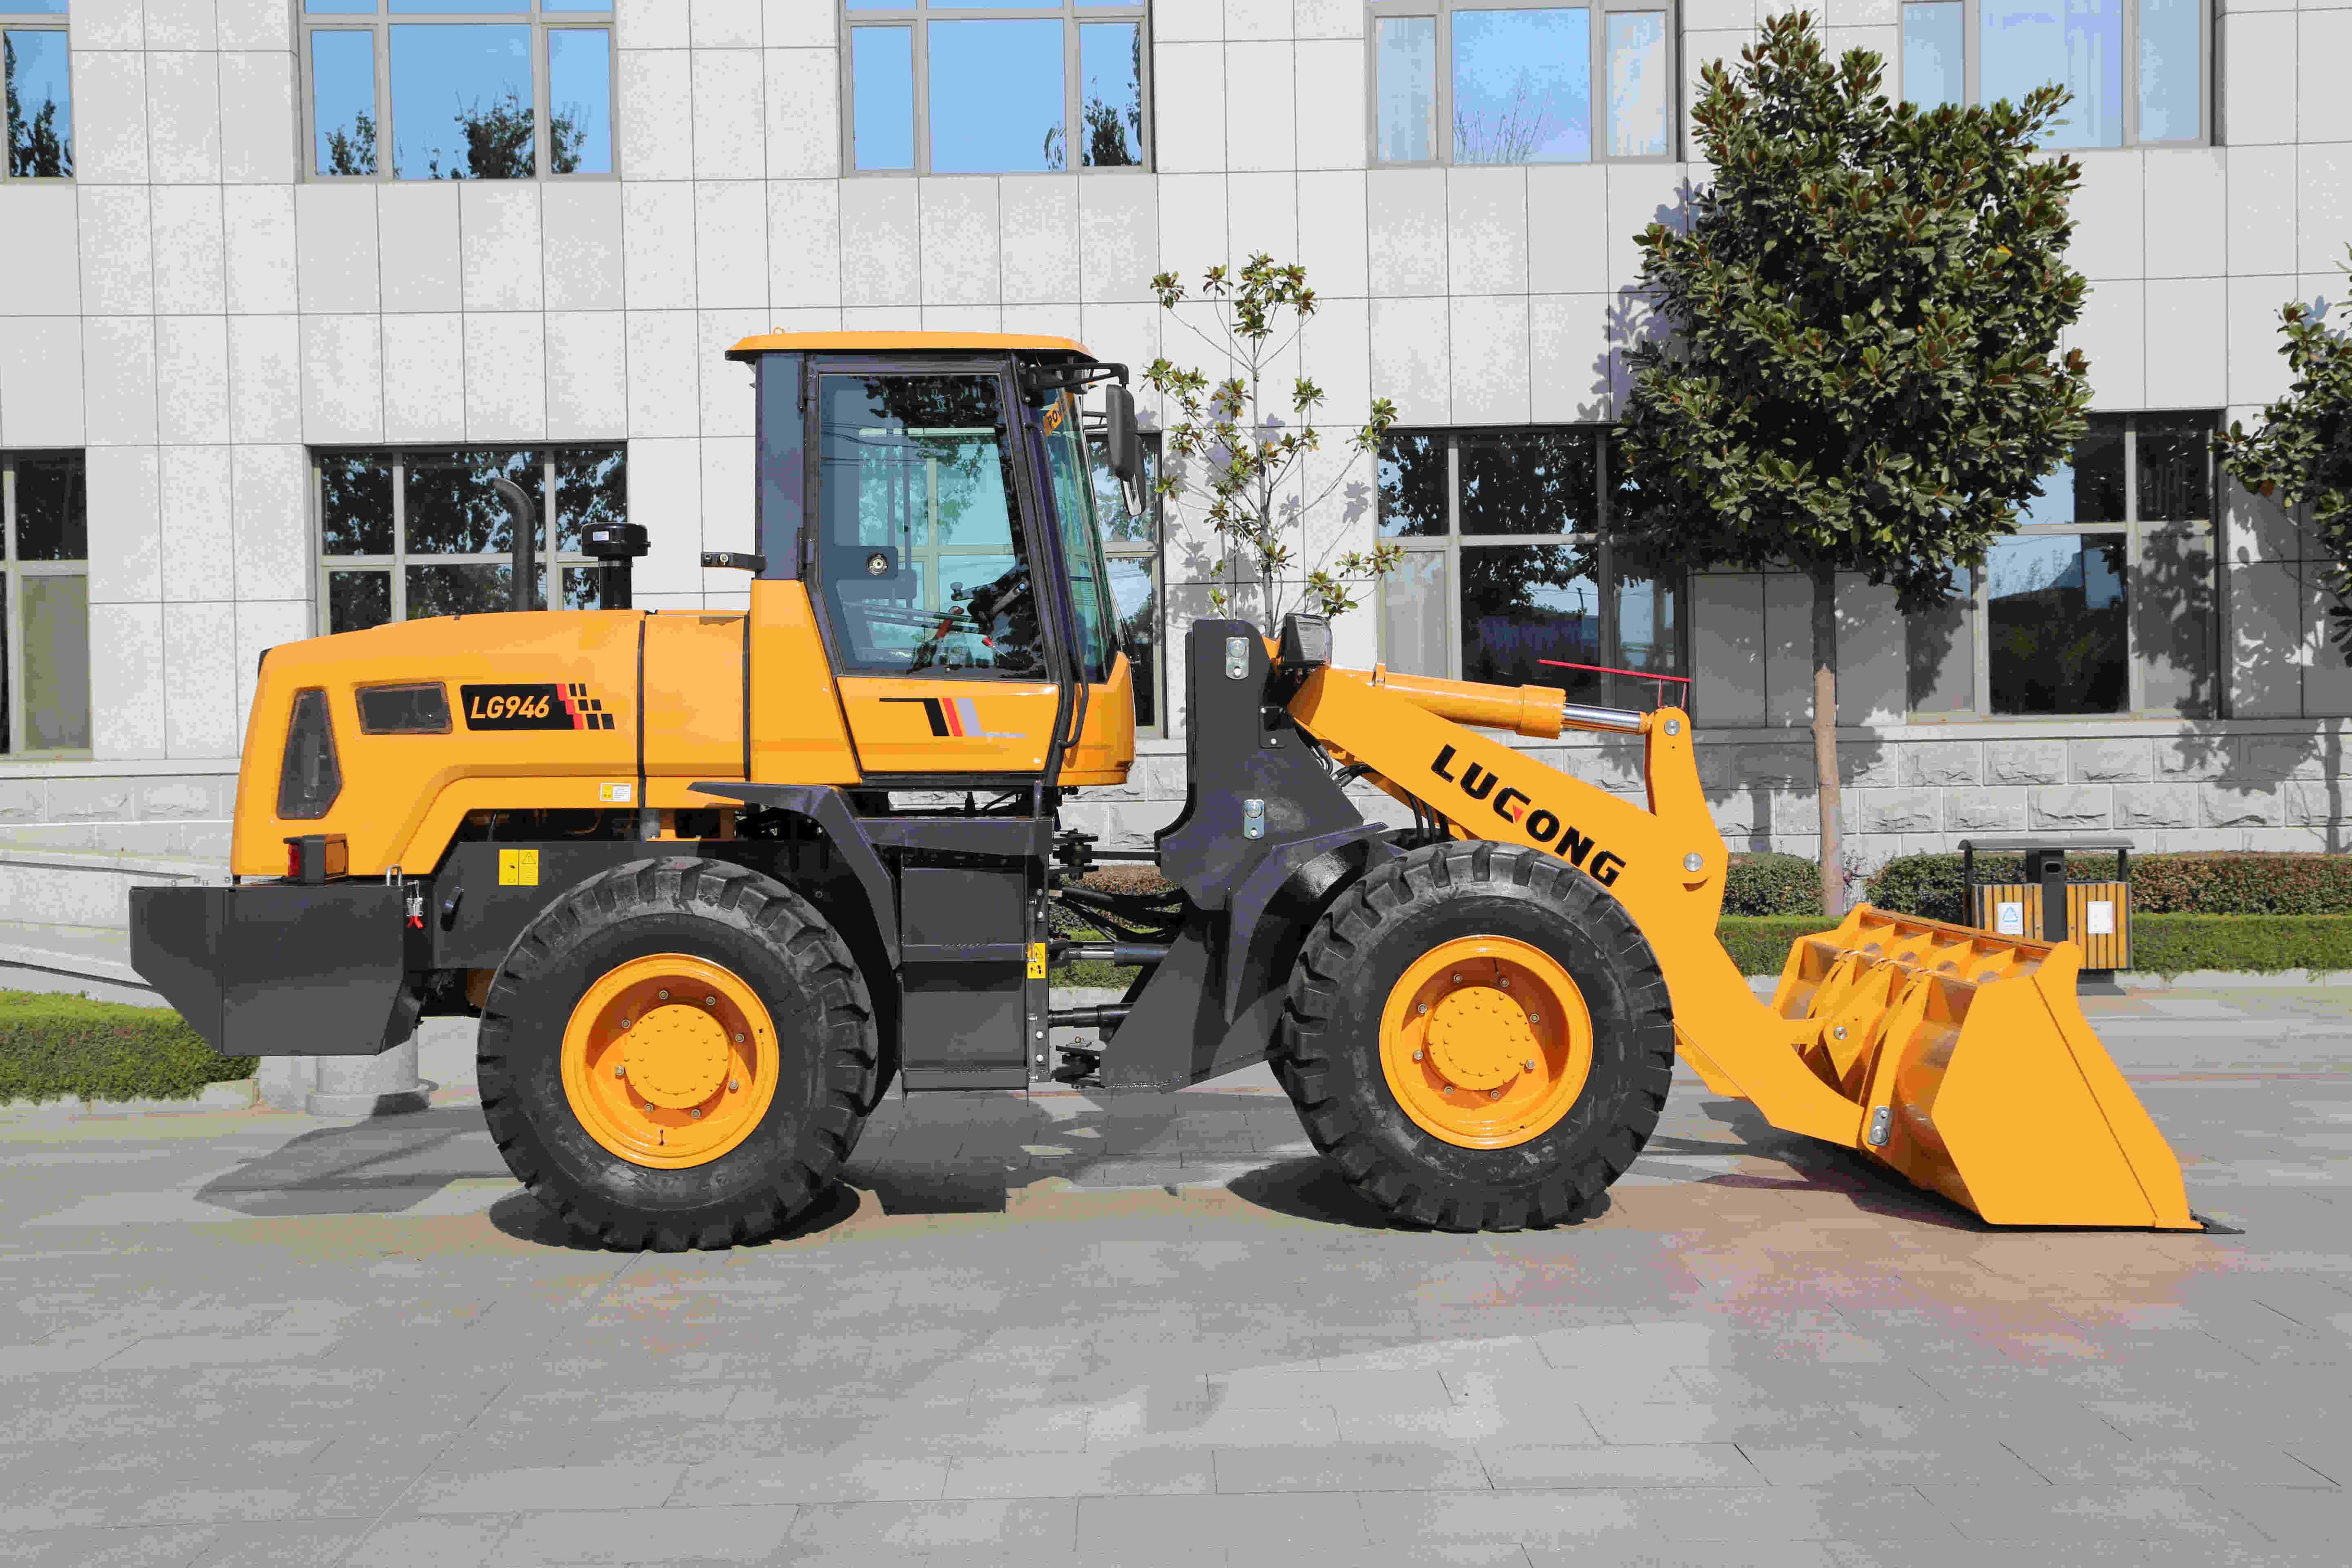 LUGONG LG939 Compact China Loaders 1m³ Front End loaders Price